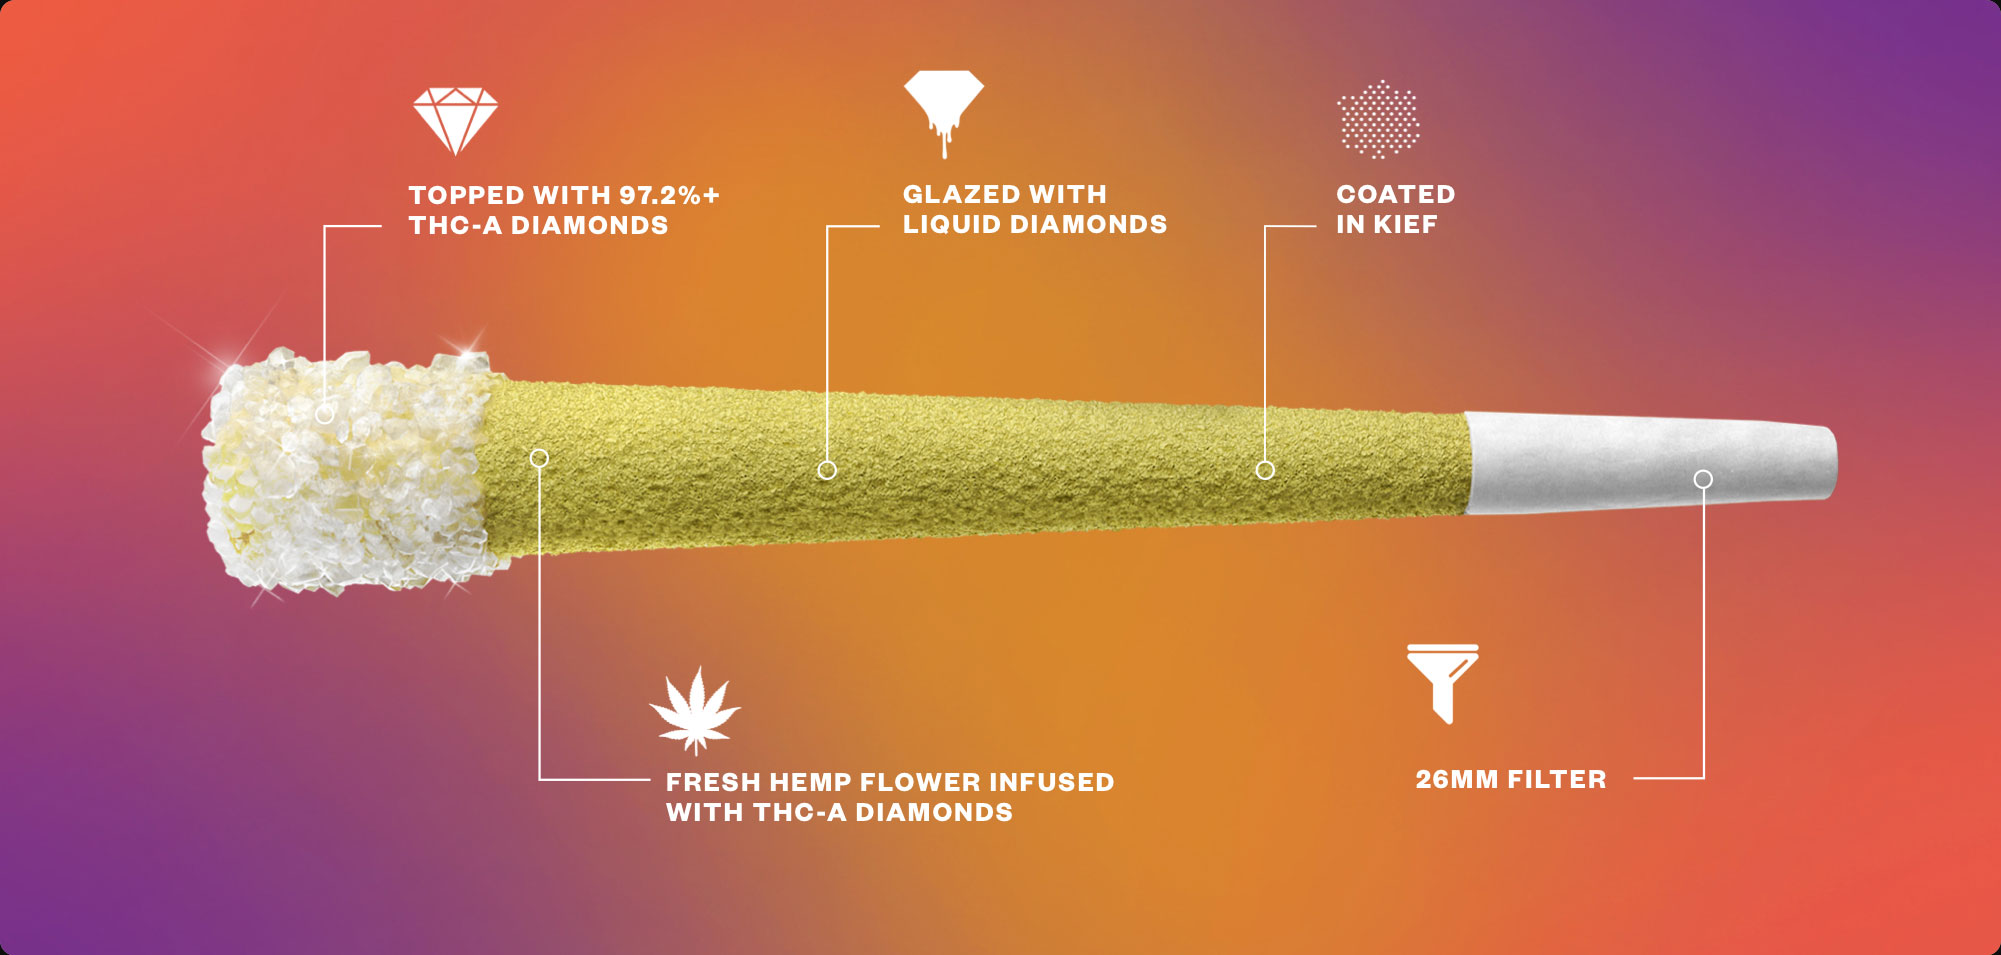 THA-a diamond infused preroll infographic. Topped with 97.2%+ THC-a diamonds. Glazed with liquid diamonds. Coated in kief. Fresh hemp flower infused with THC-a diamonds. 26 millimeter filter.